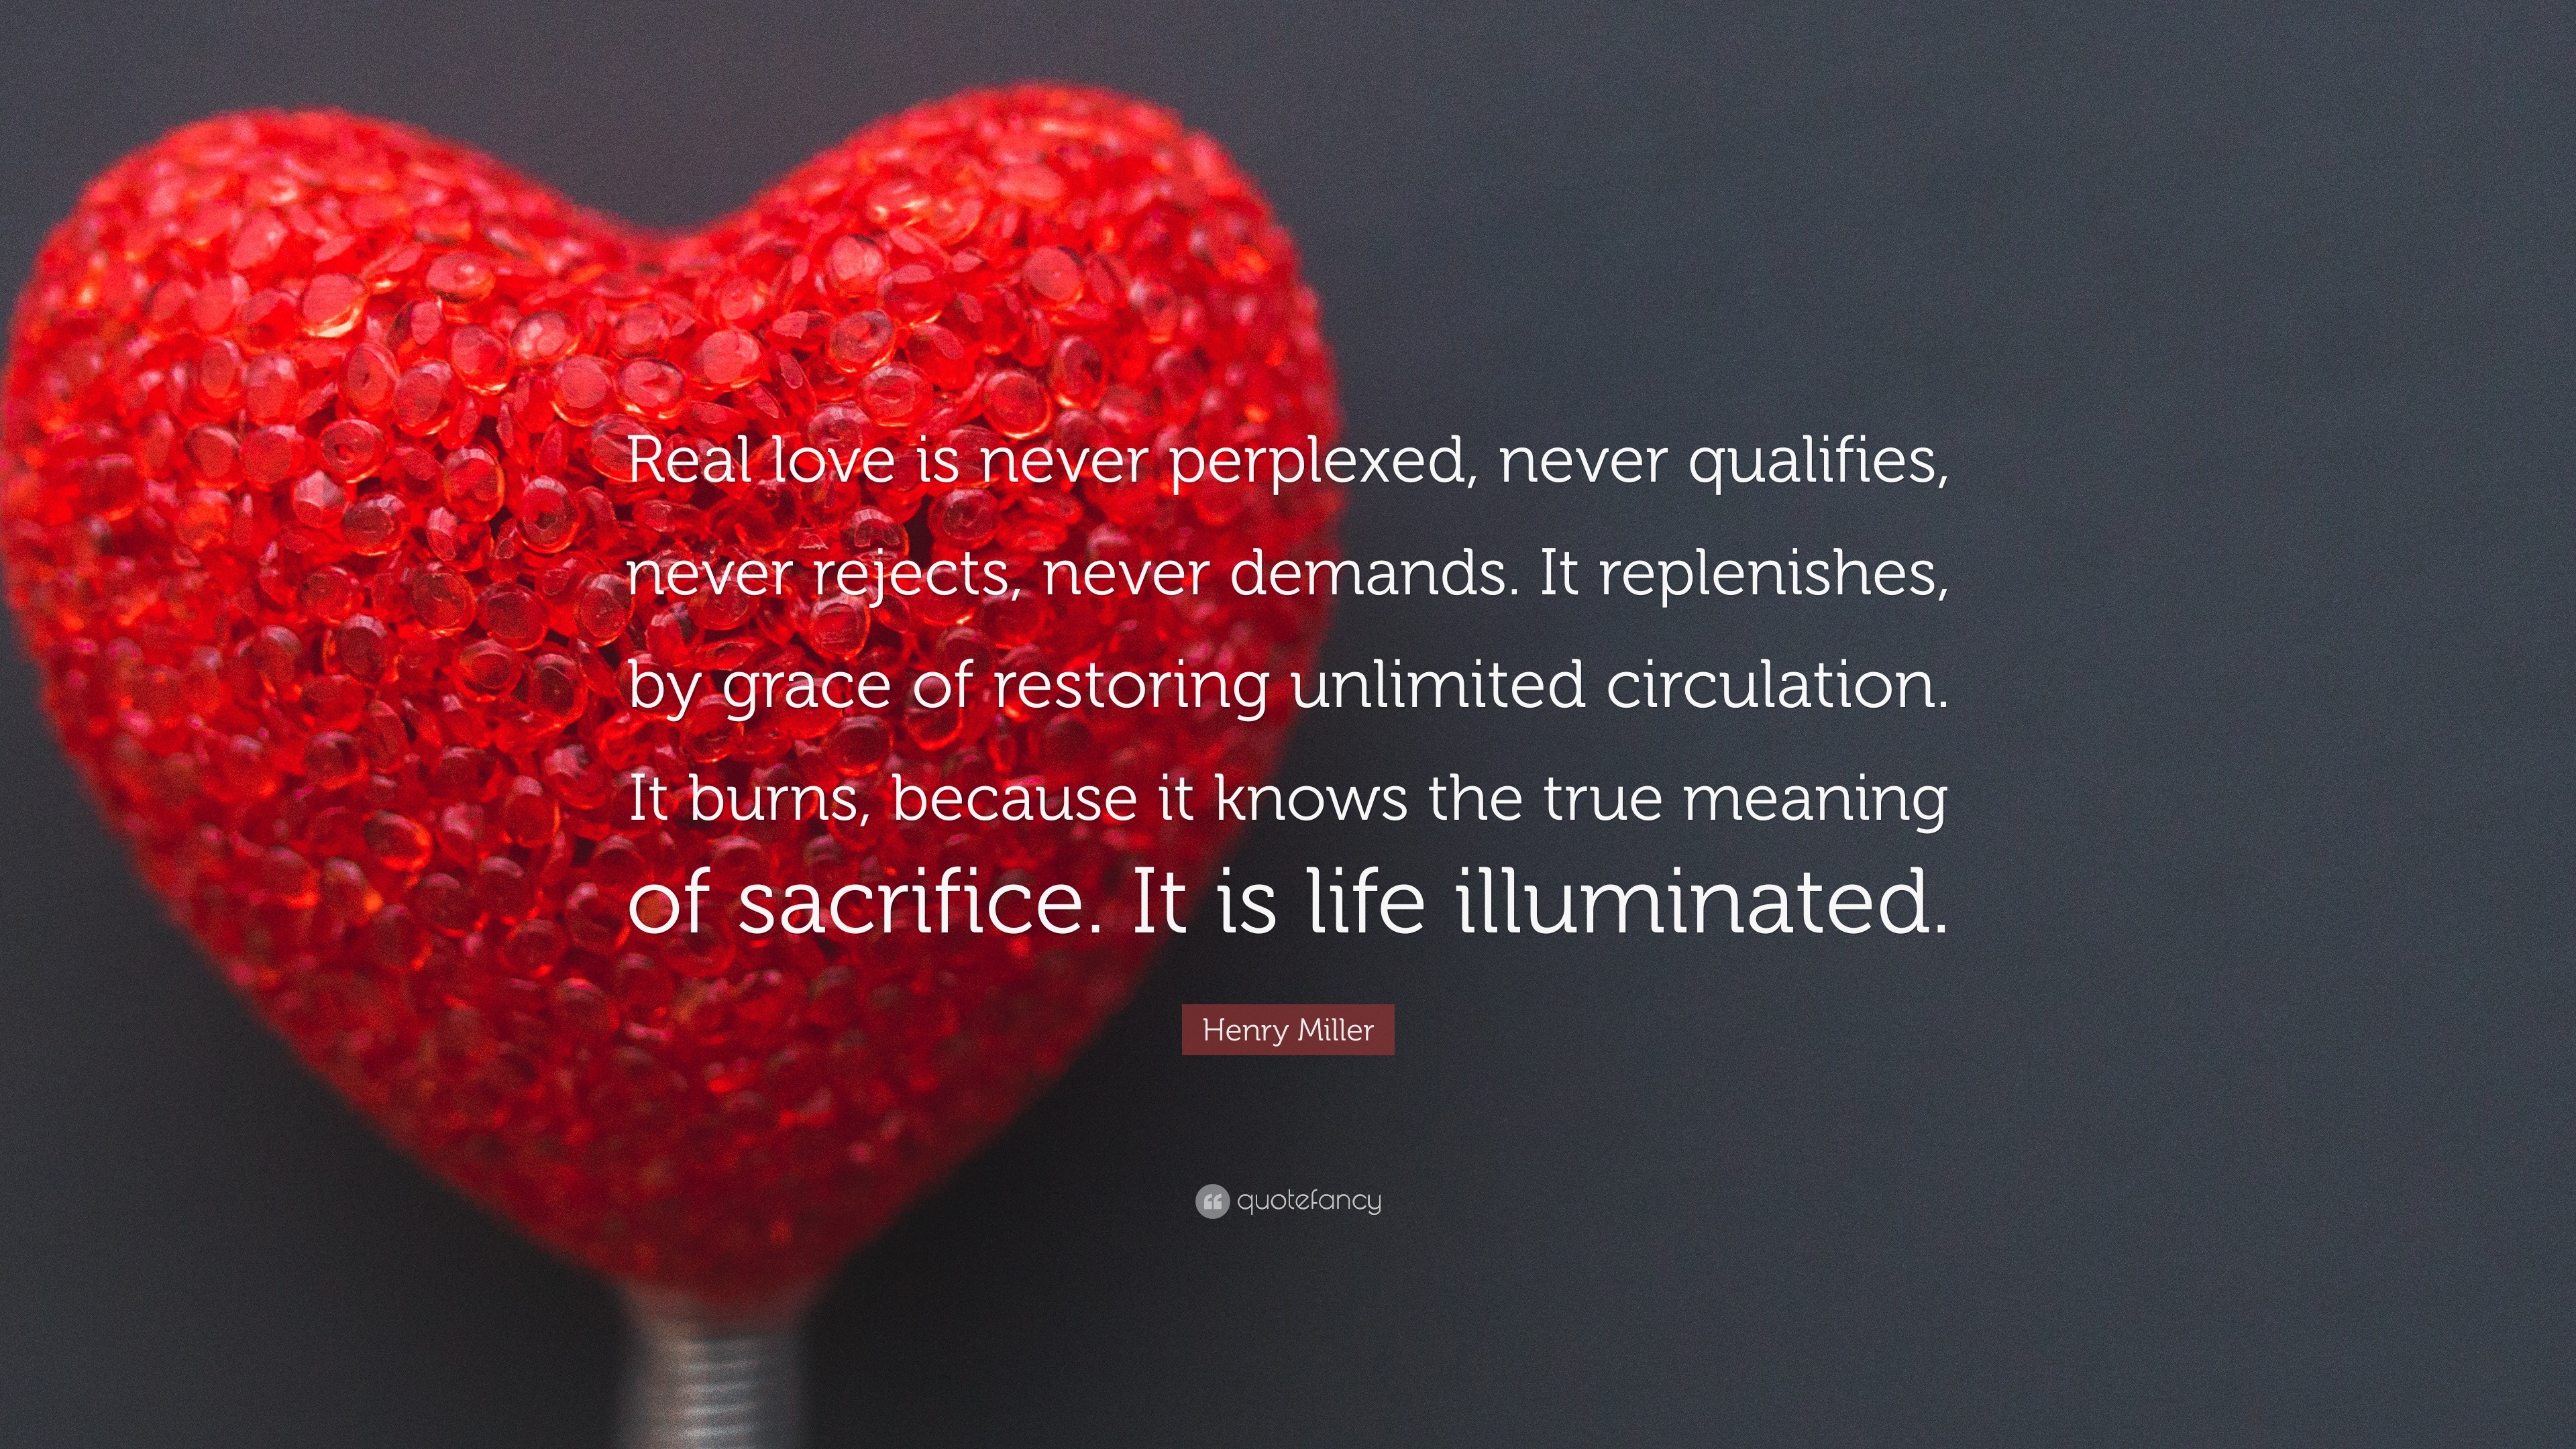 Henry Miller Quote: “Real love is never perplexed, never qualifies